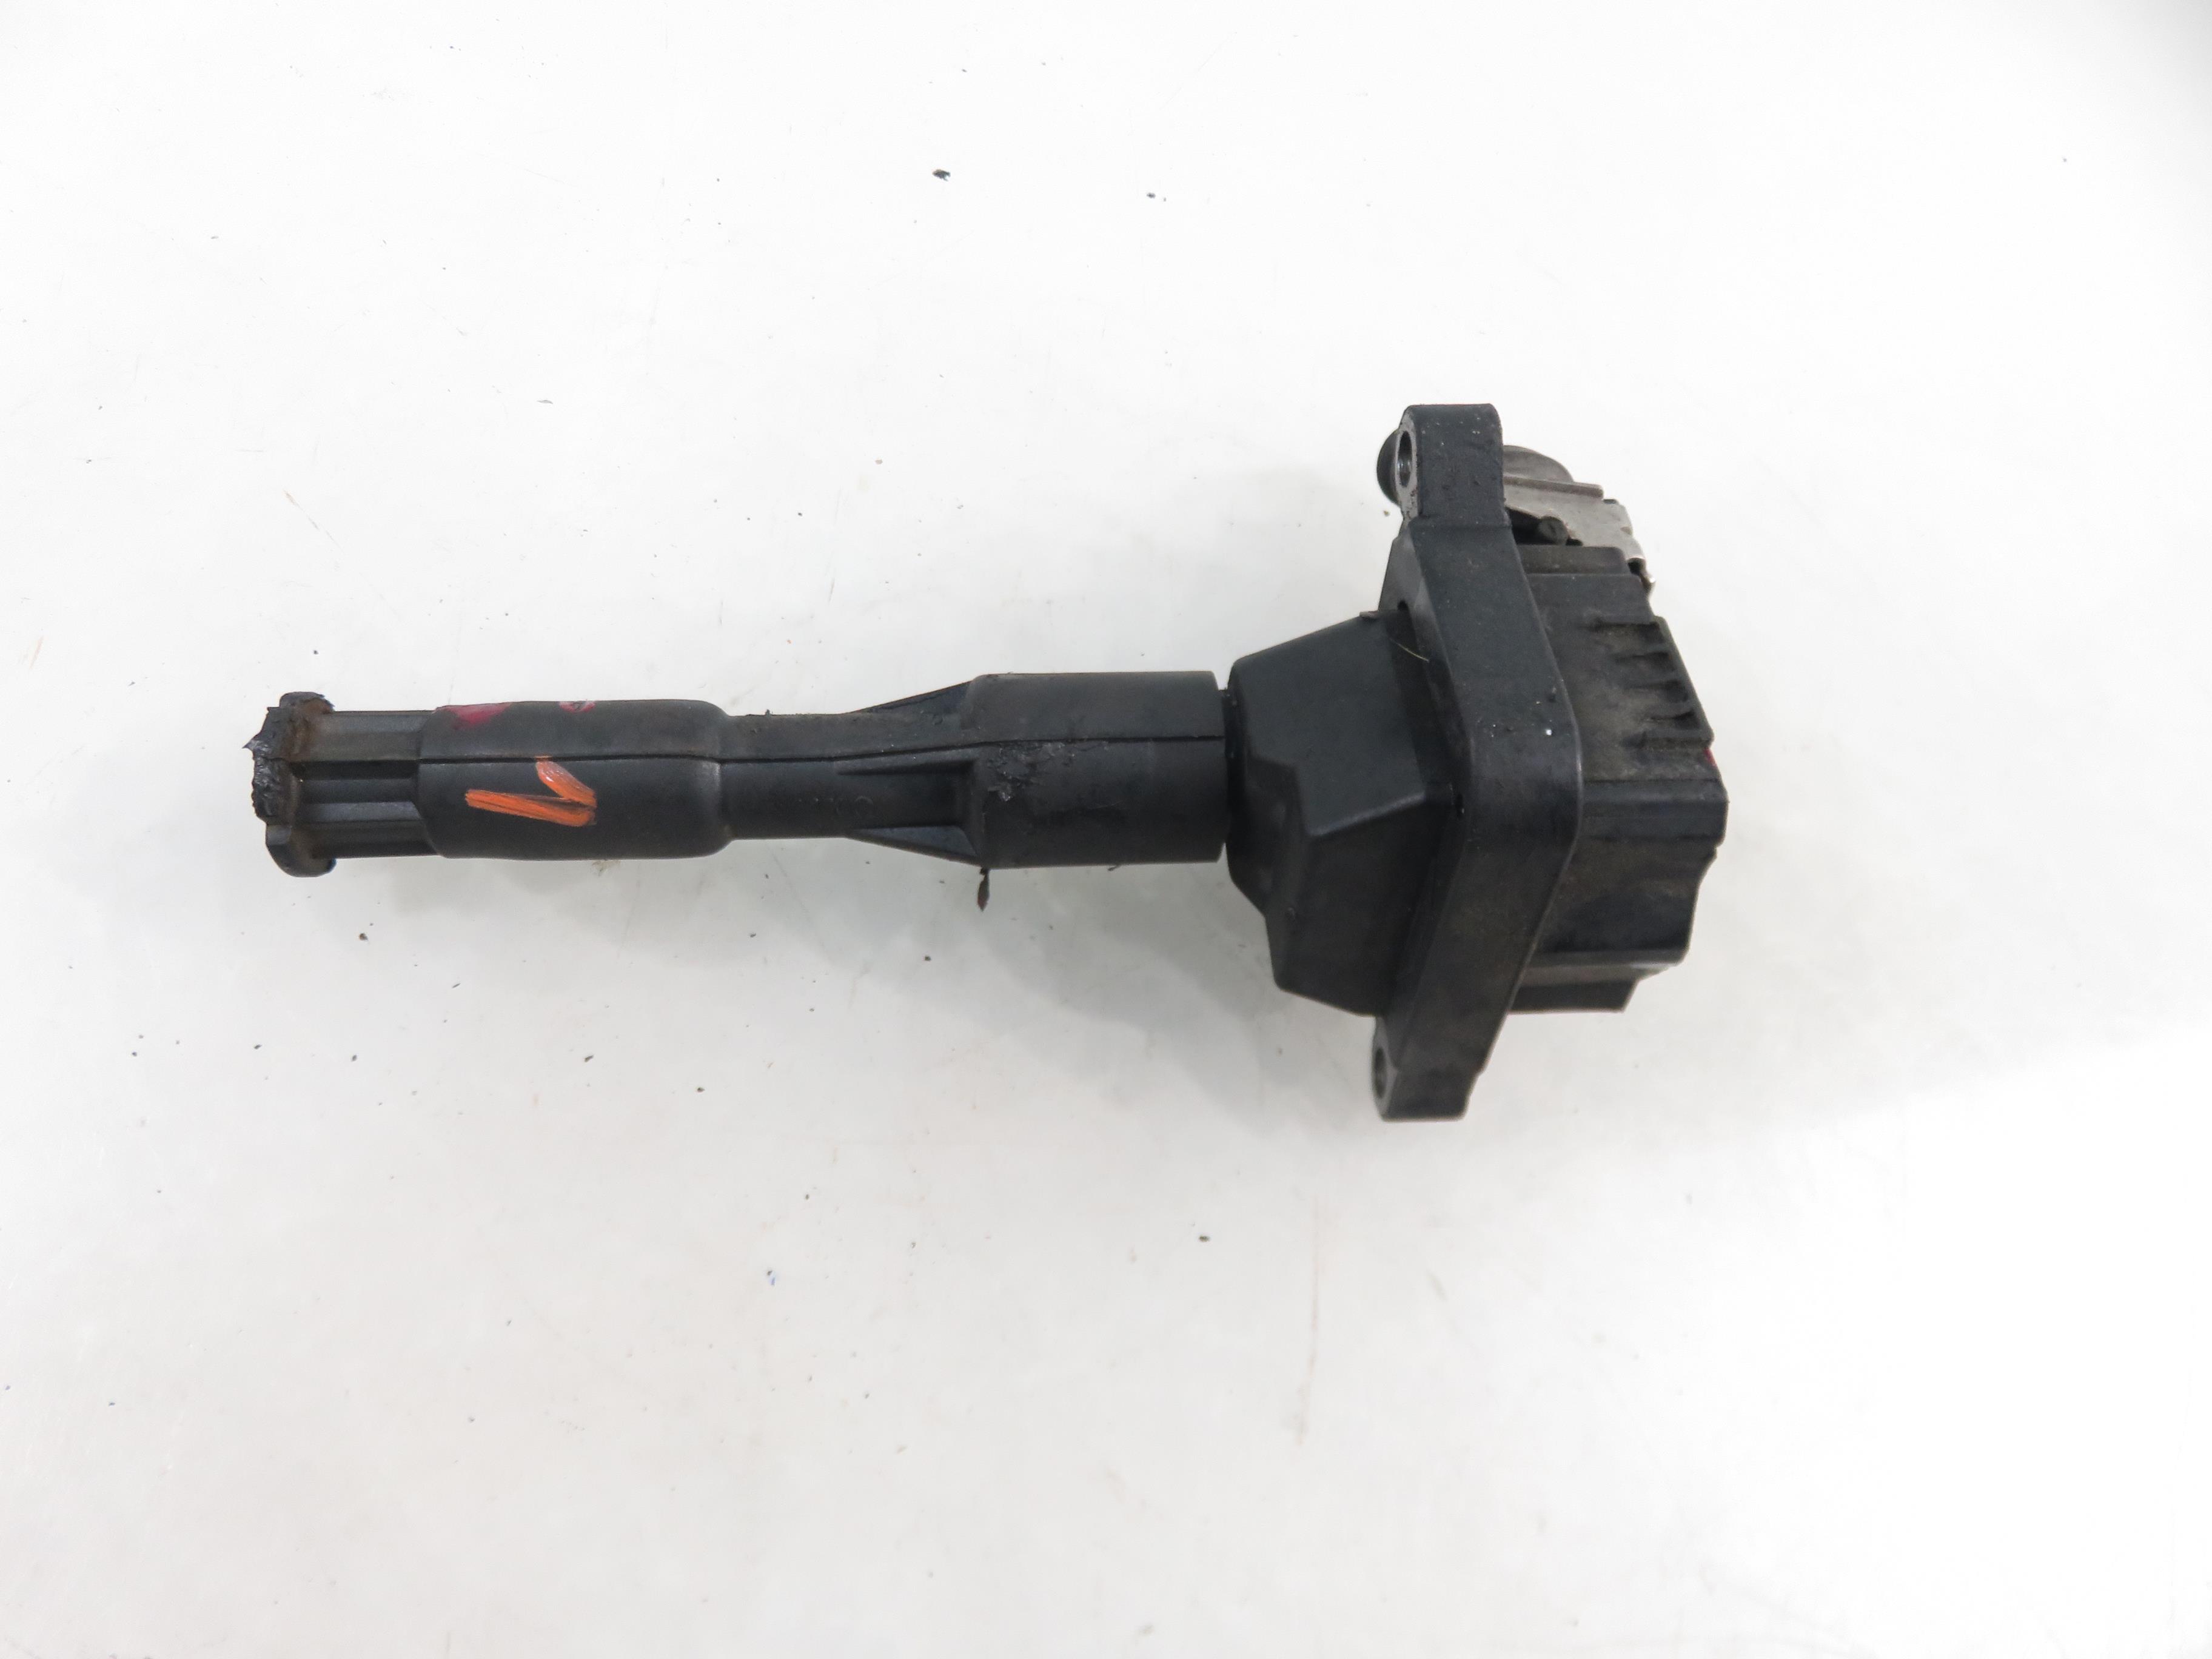 BMW 5 Series E39 (1995-2004) High Voltage Ignition Coil 0221504004, 1703227 23073250